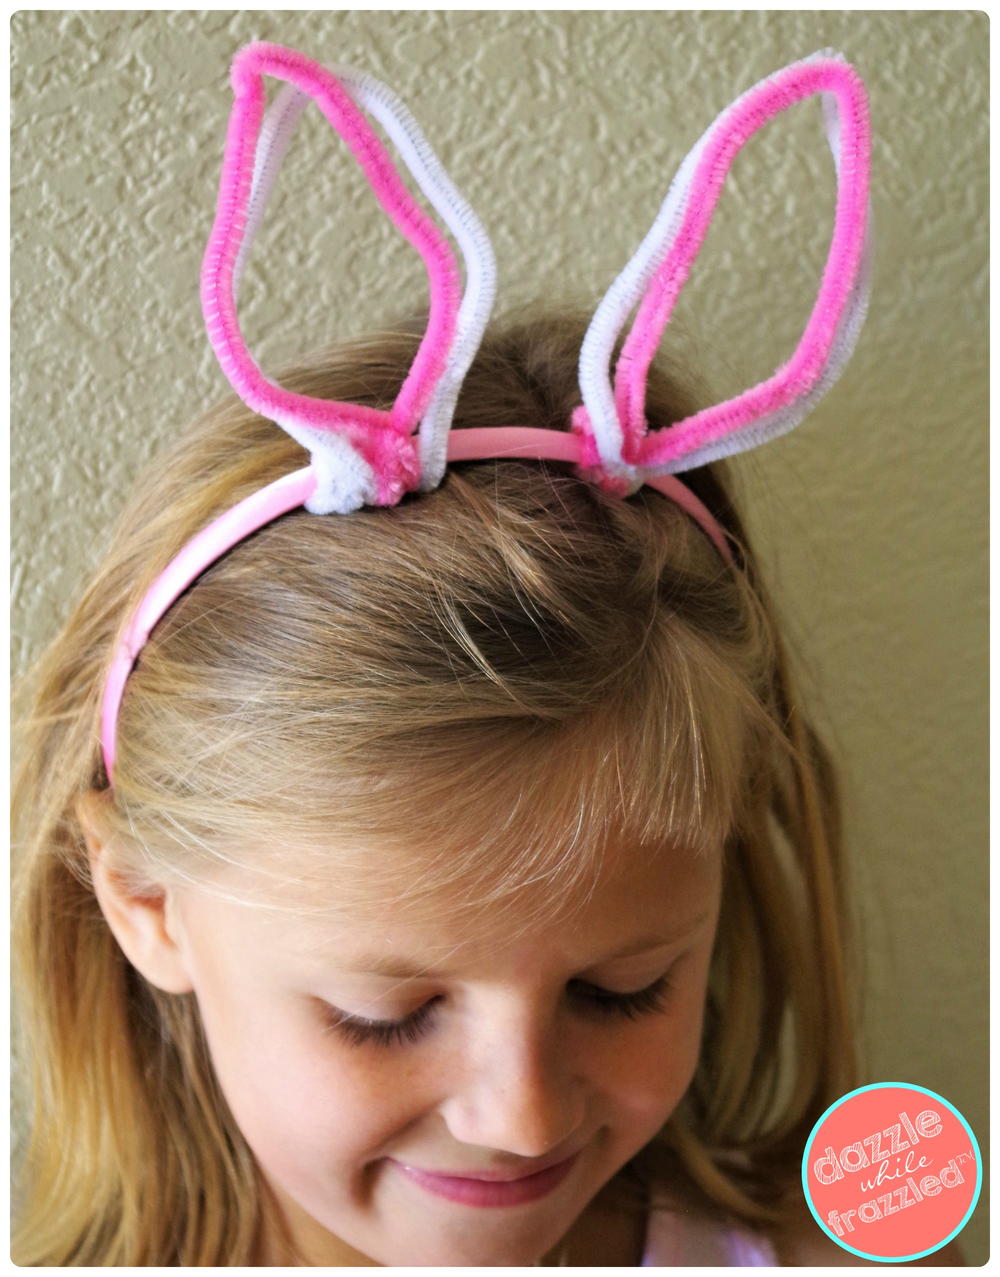 ➤ How to make halloween ears with pipe cleaners